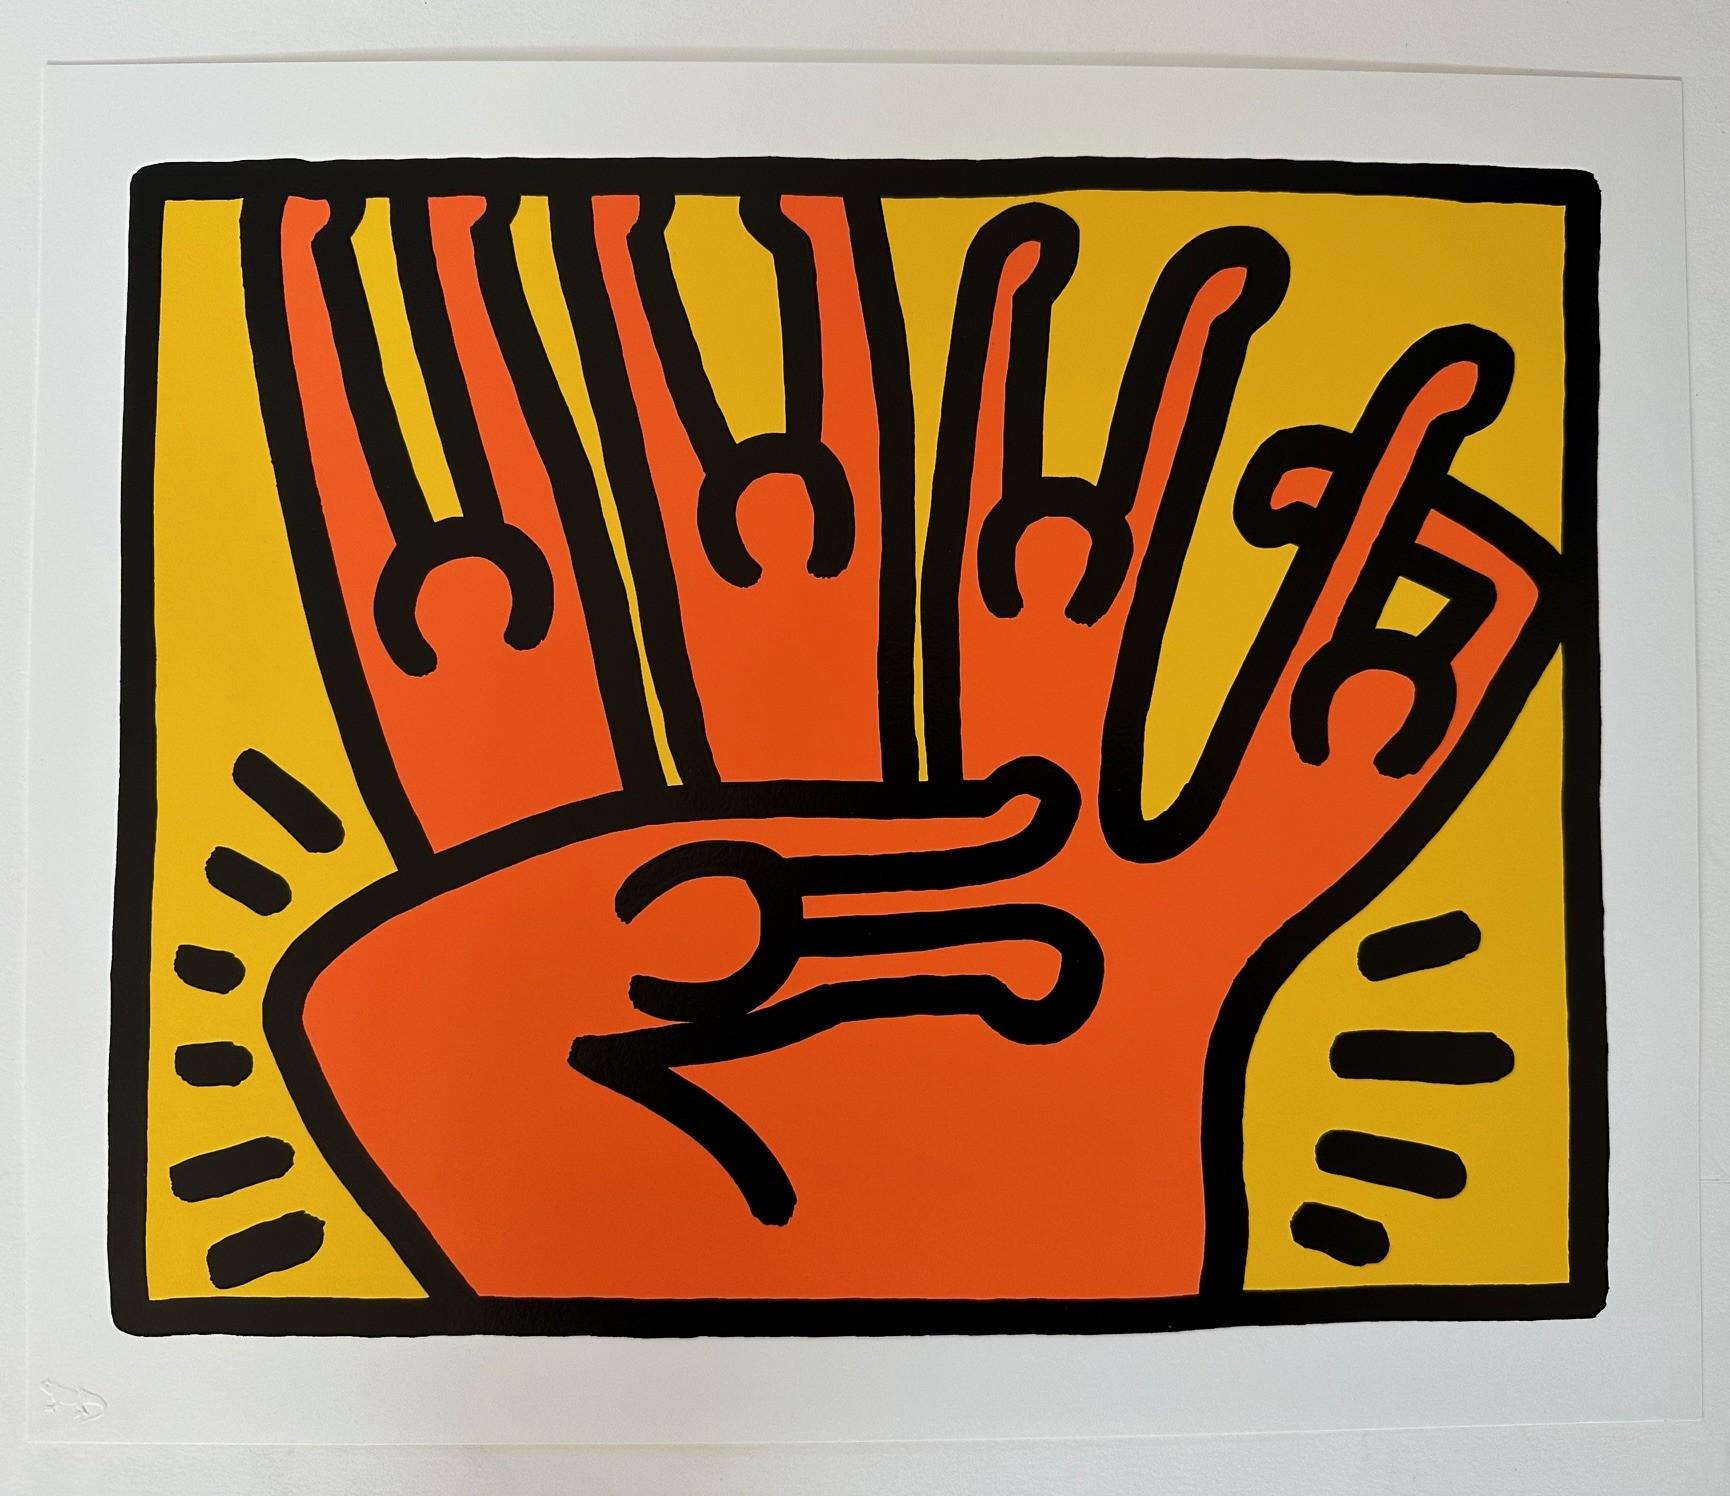 The complete portfolio of 4 individual pieces. Each with the Keith Haring Estate stamp verso, signed in pencil by the Executor for the Estate, Julia Gruen, and numbered 26/200. Published by Martin Lawrence Editions, Los Angeles. Reference Littman,